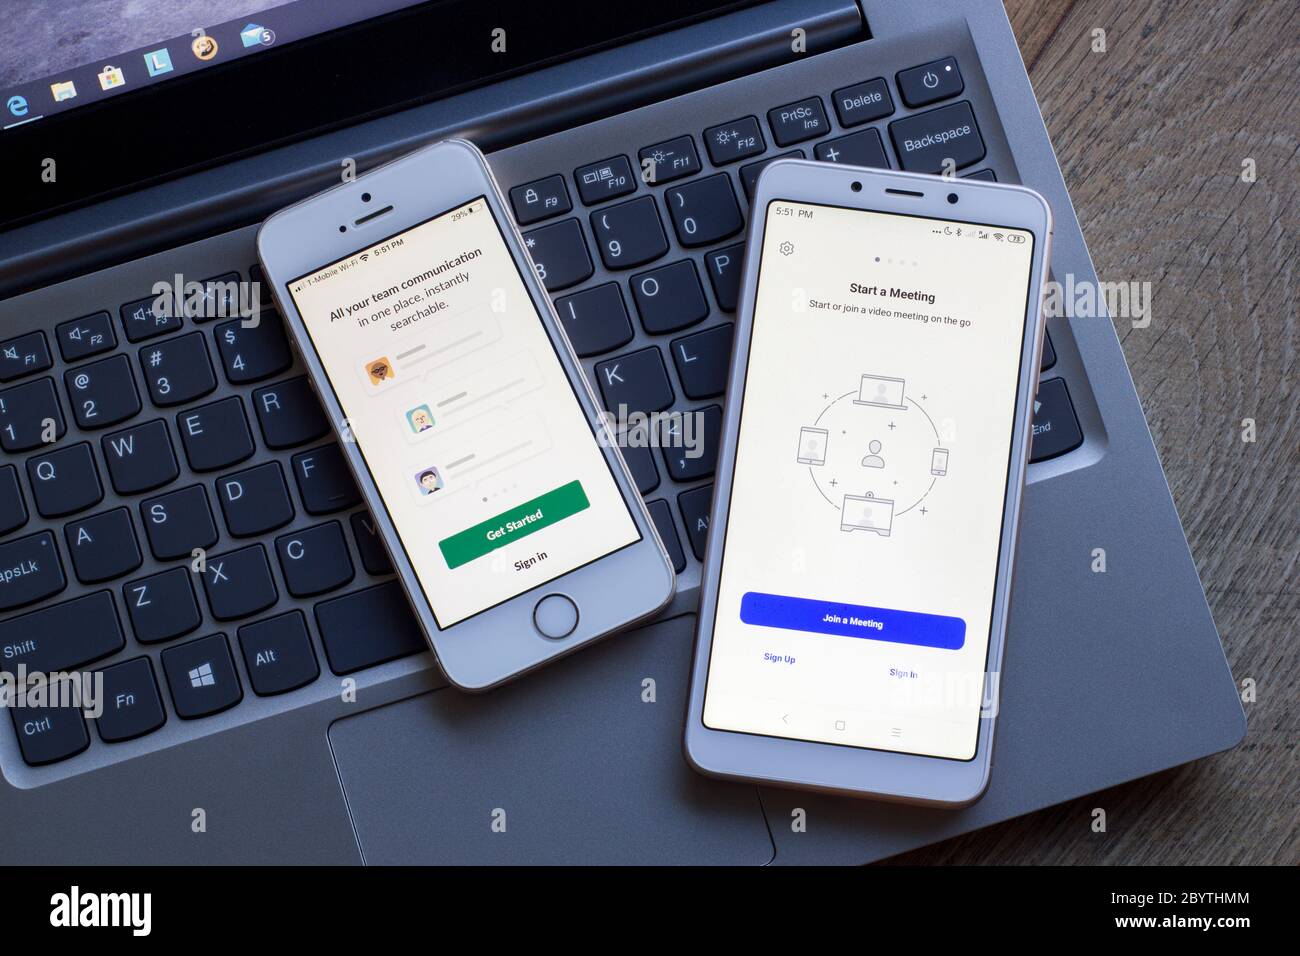 Team communication and collaboration tools login pages seen on smartphones. Left: Slack. Right: Zoom Cloud Meetings. Stock Photo